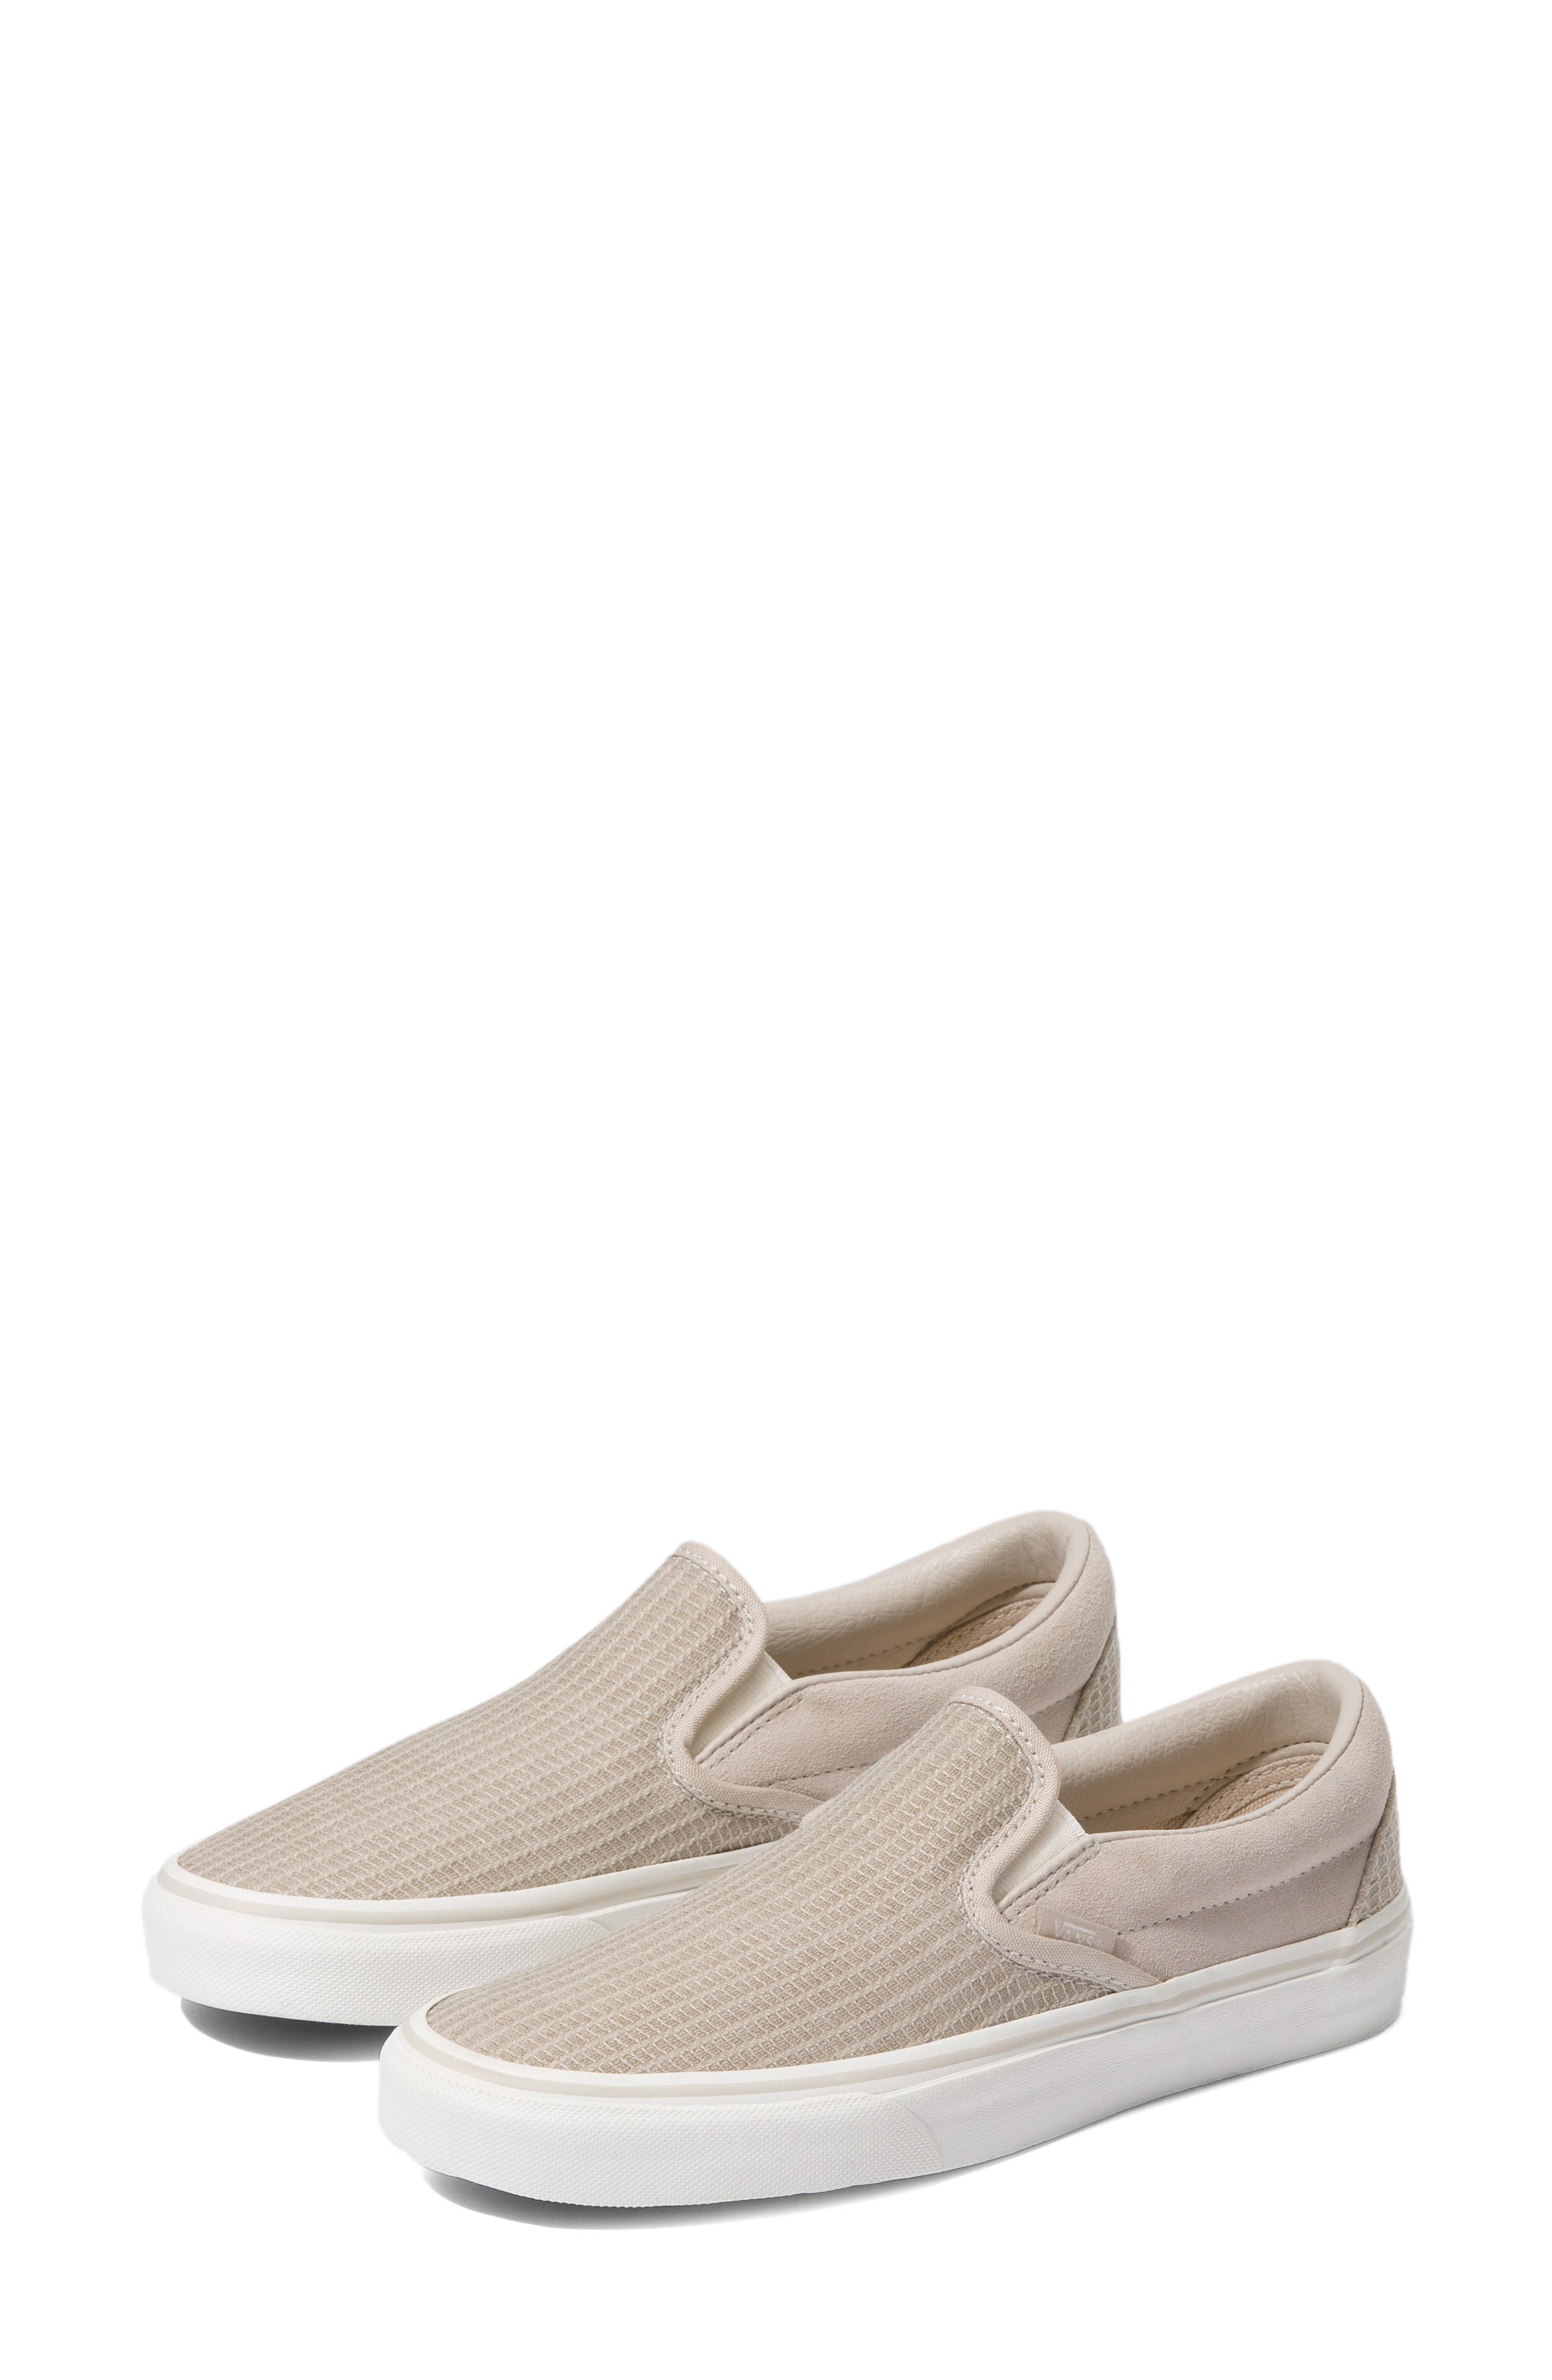 woven slip on shoes womens